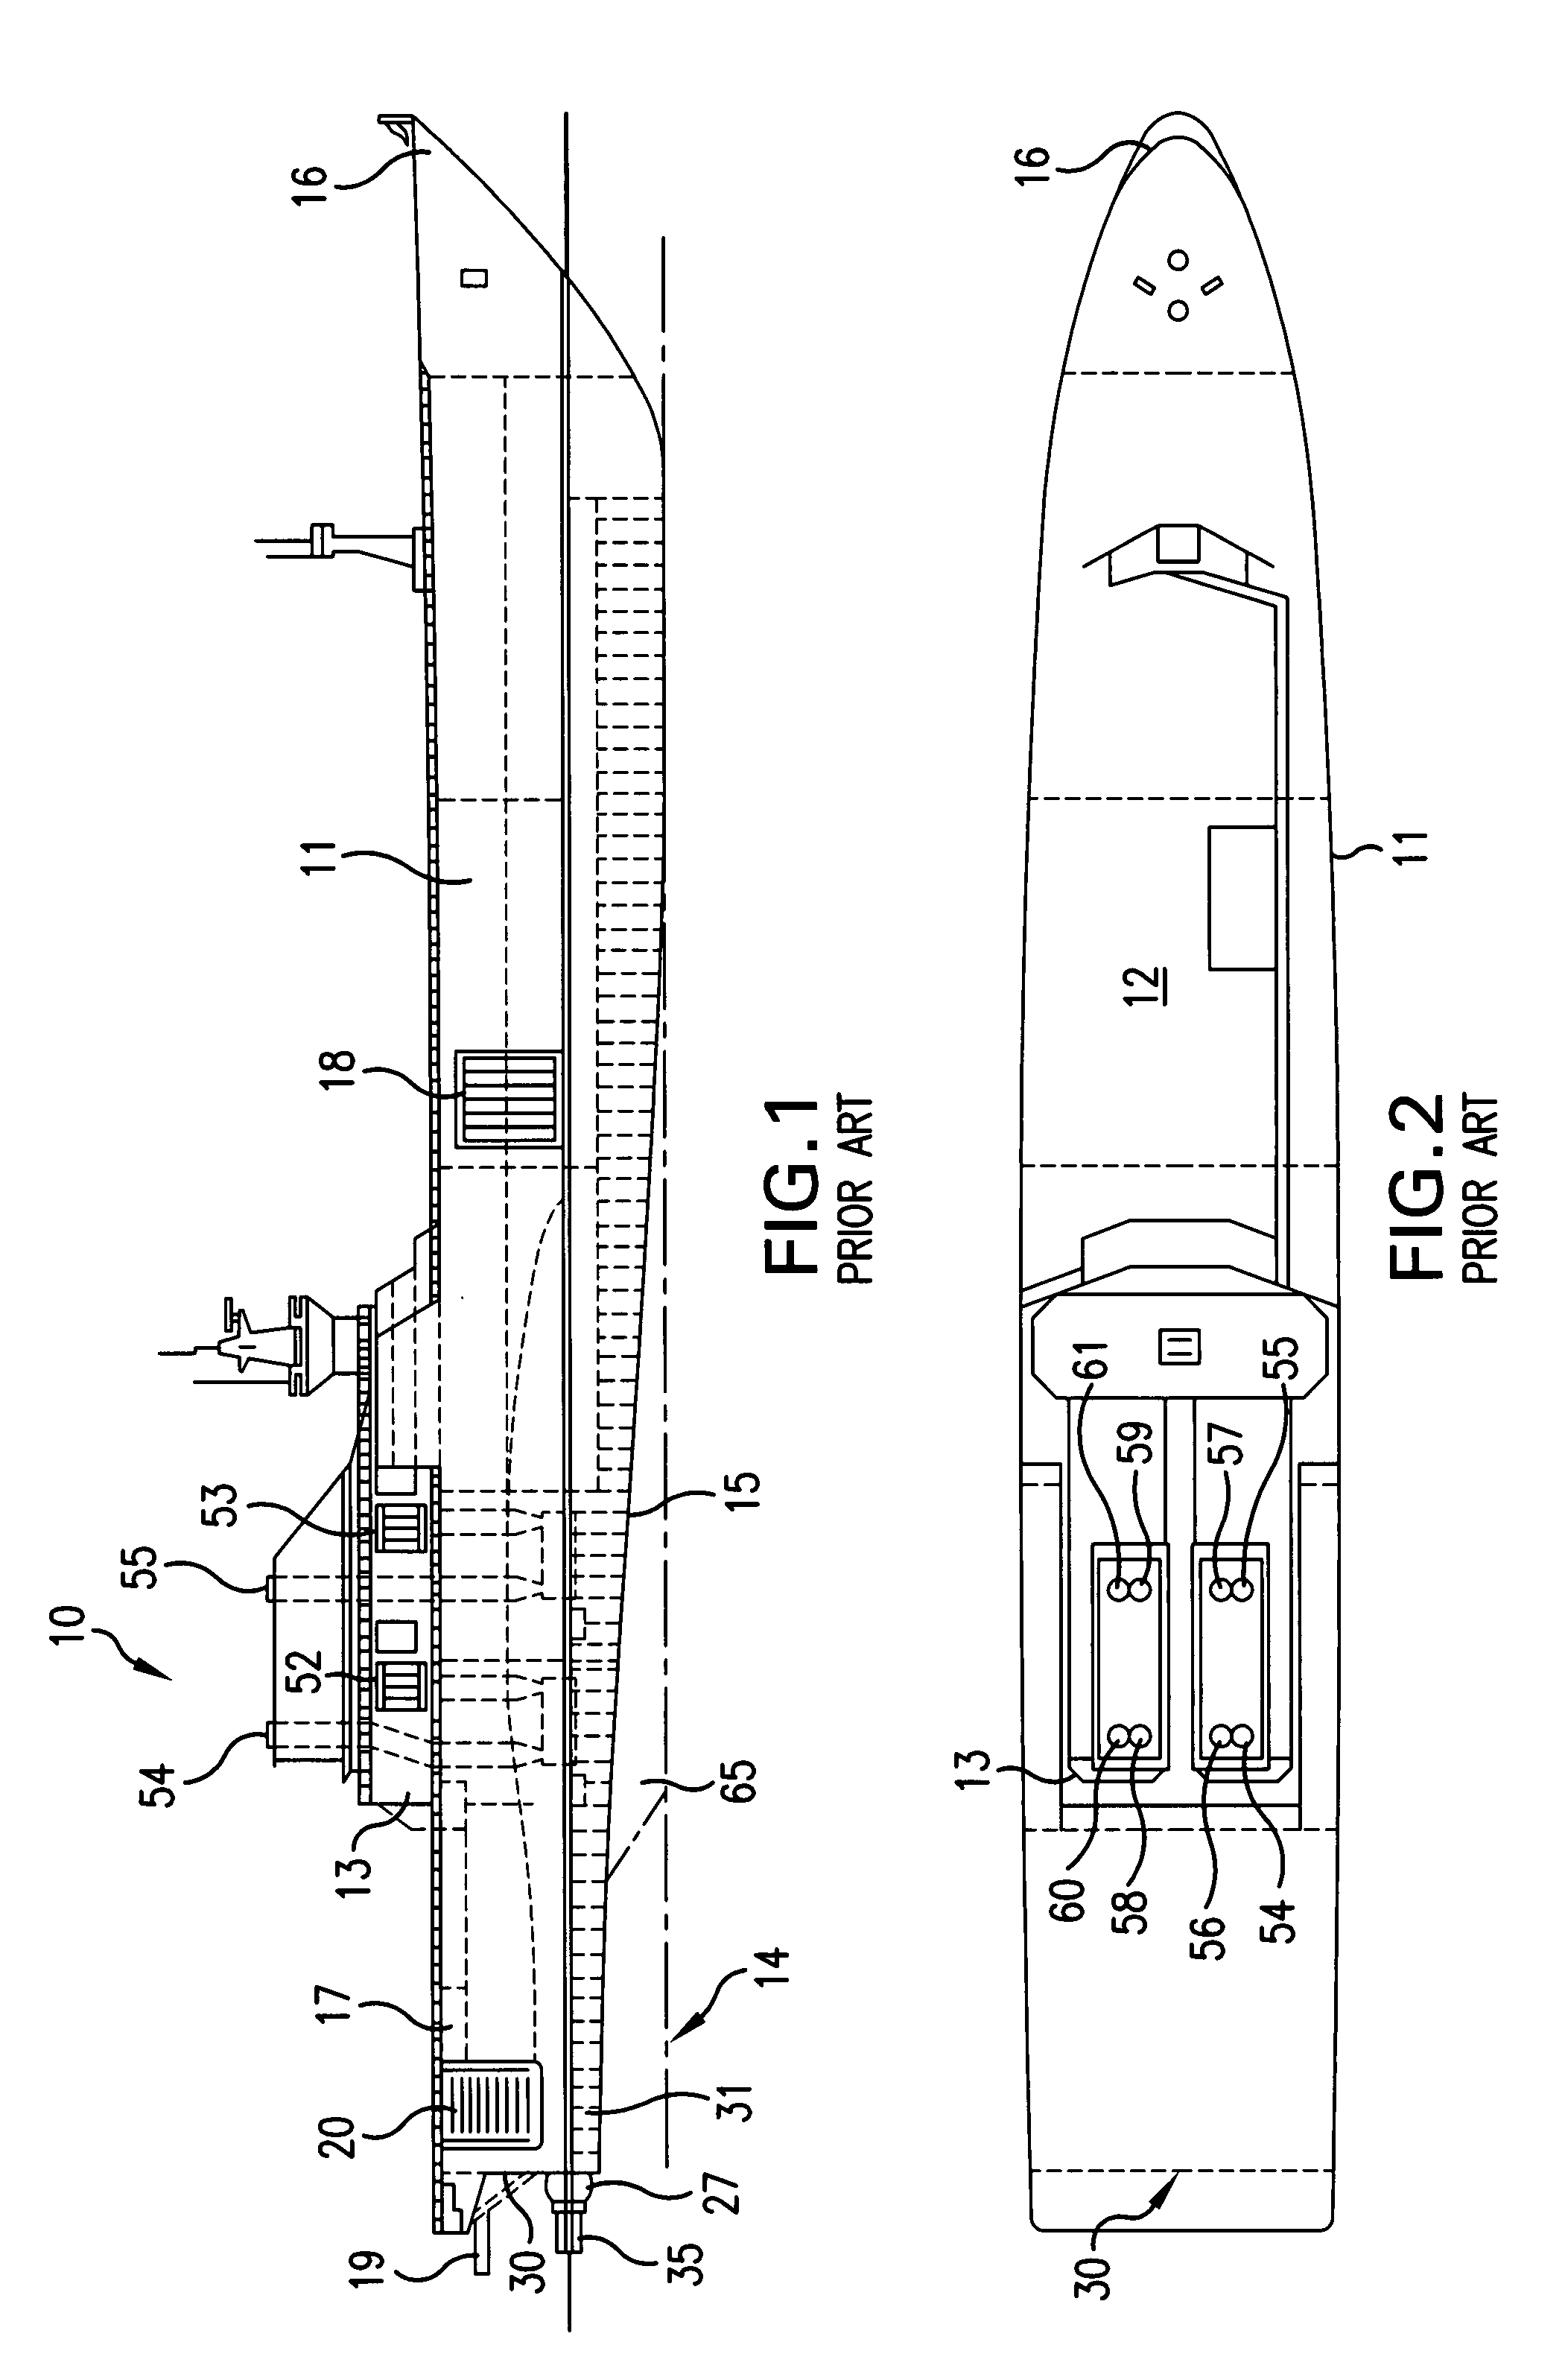 Monohull fast ship or semi-planing monohull with a drag reduction method